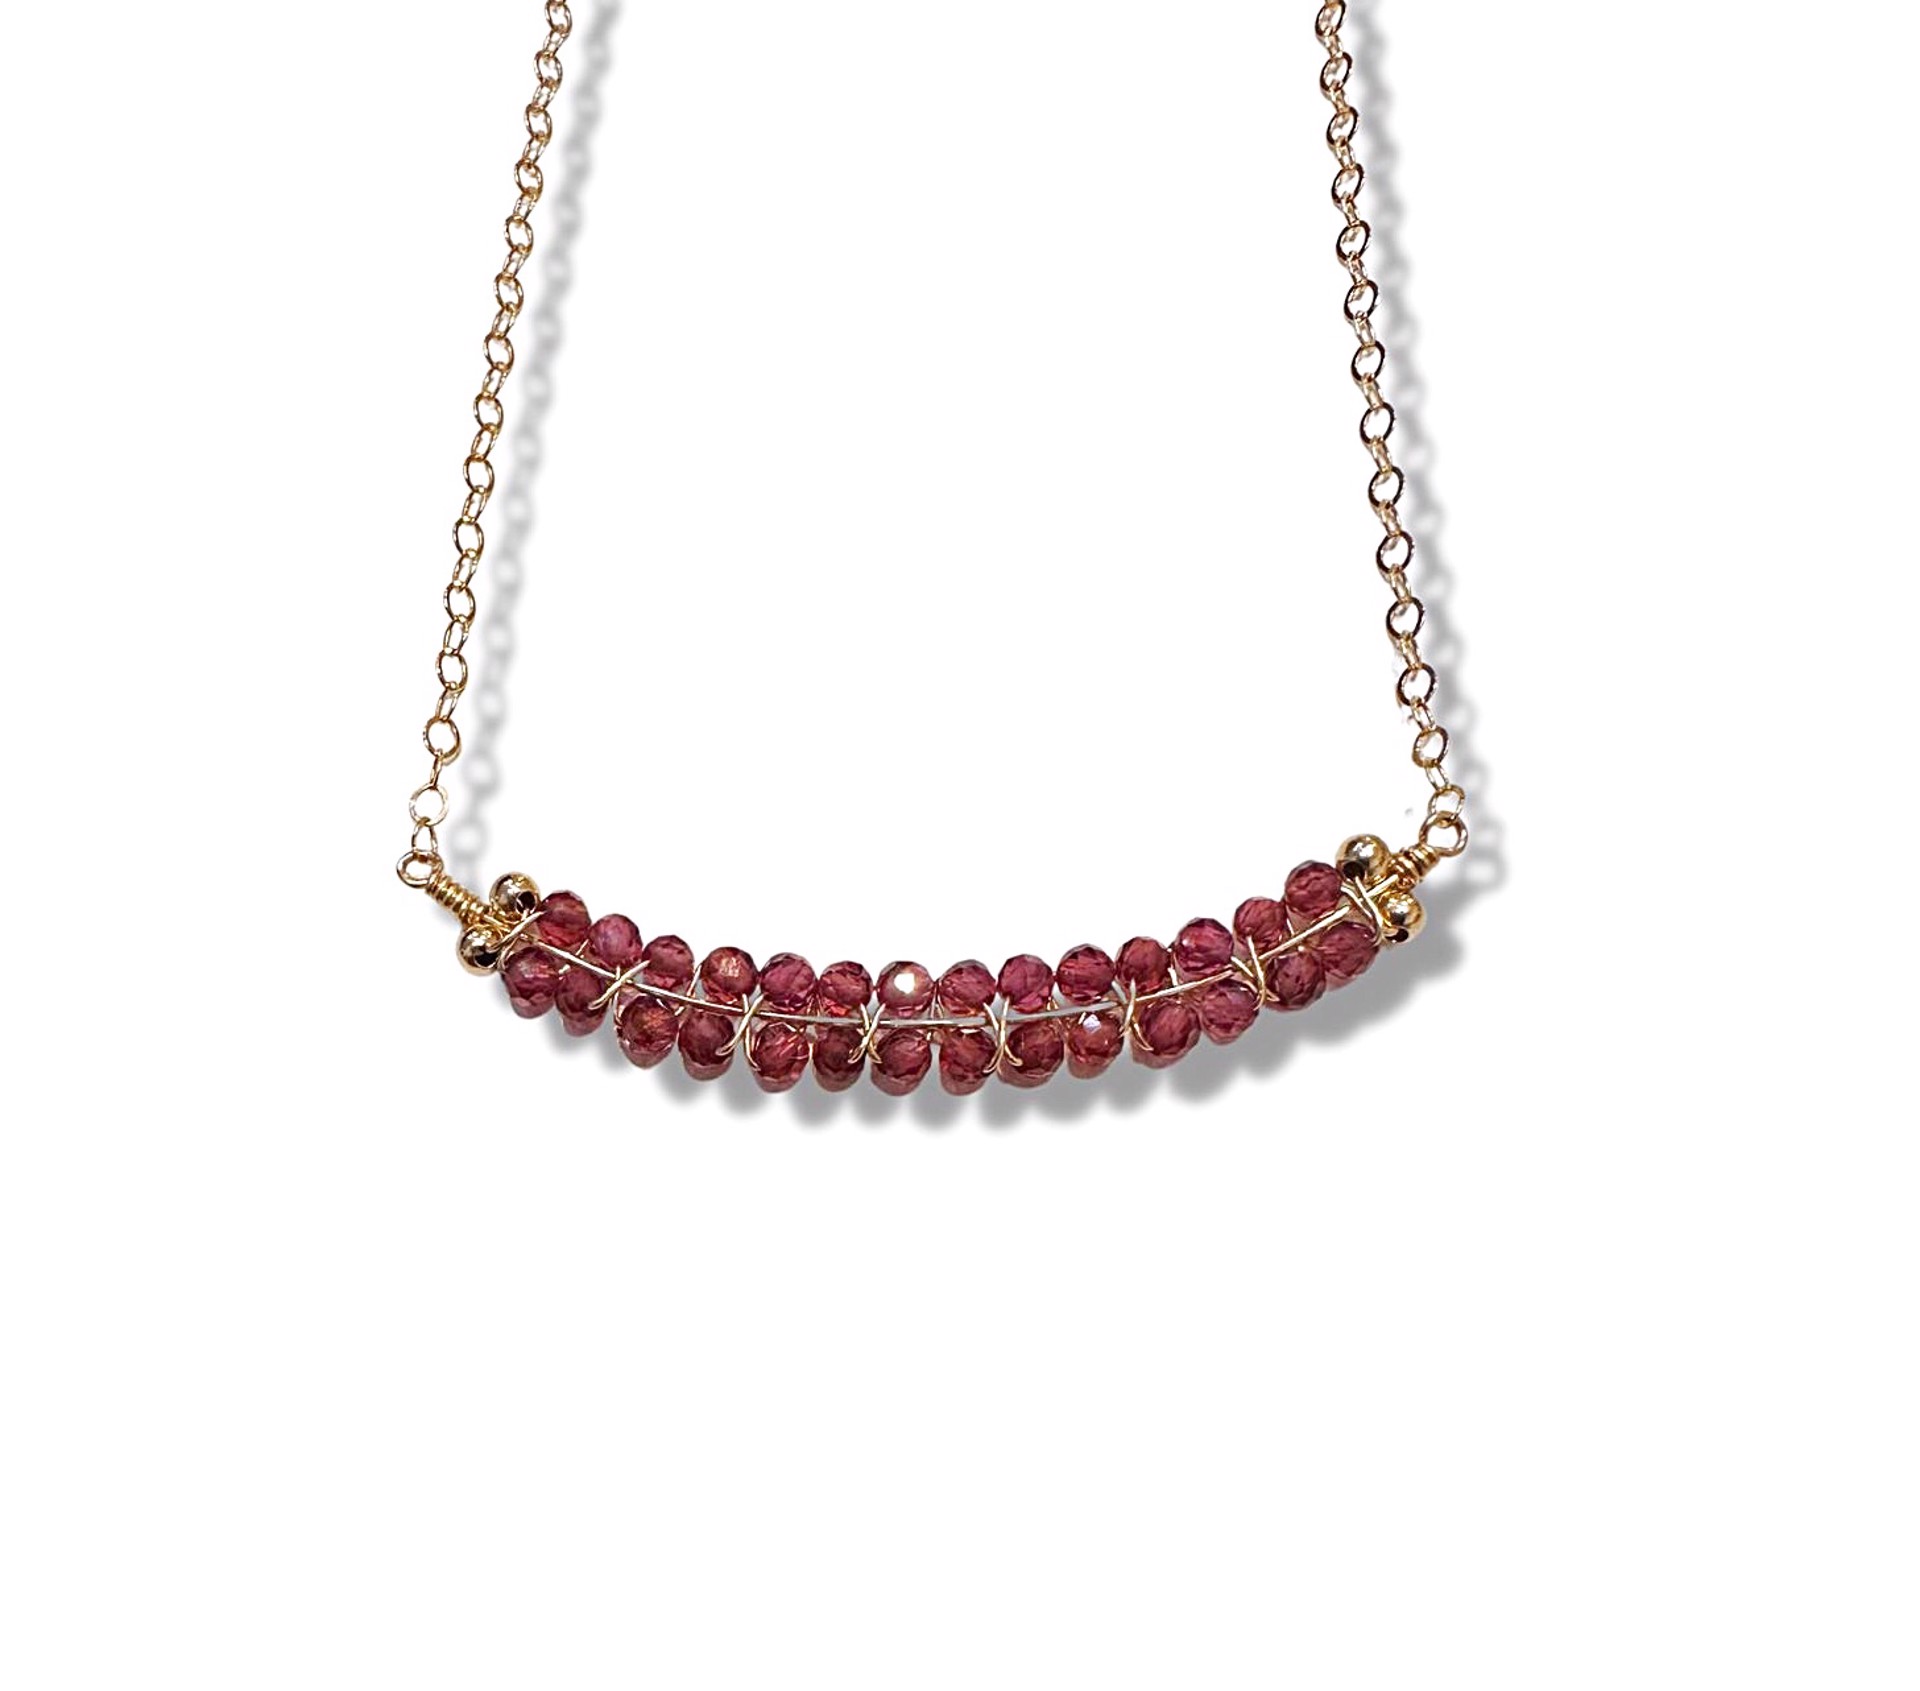 Necklace - Woven Rhodolite Garnet with 14K Gold Filling by Julia Balestracci